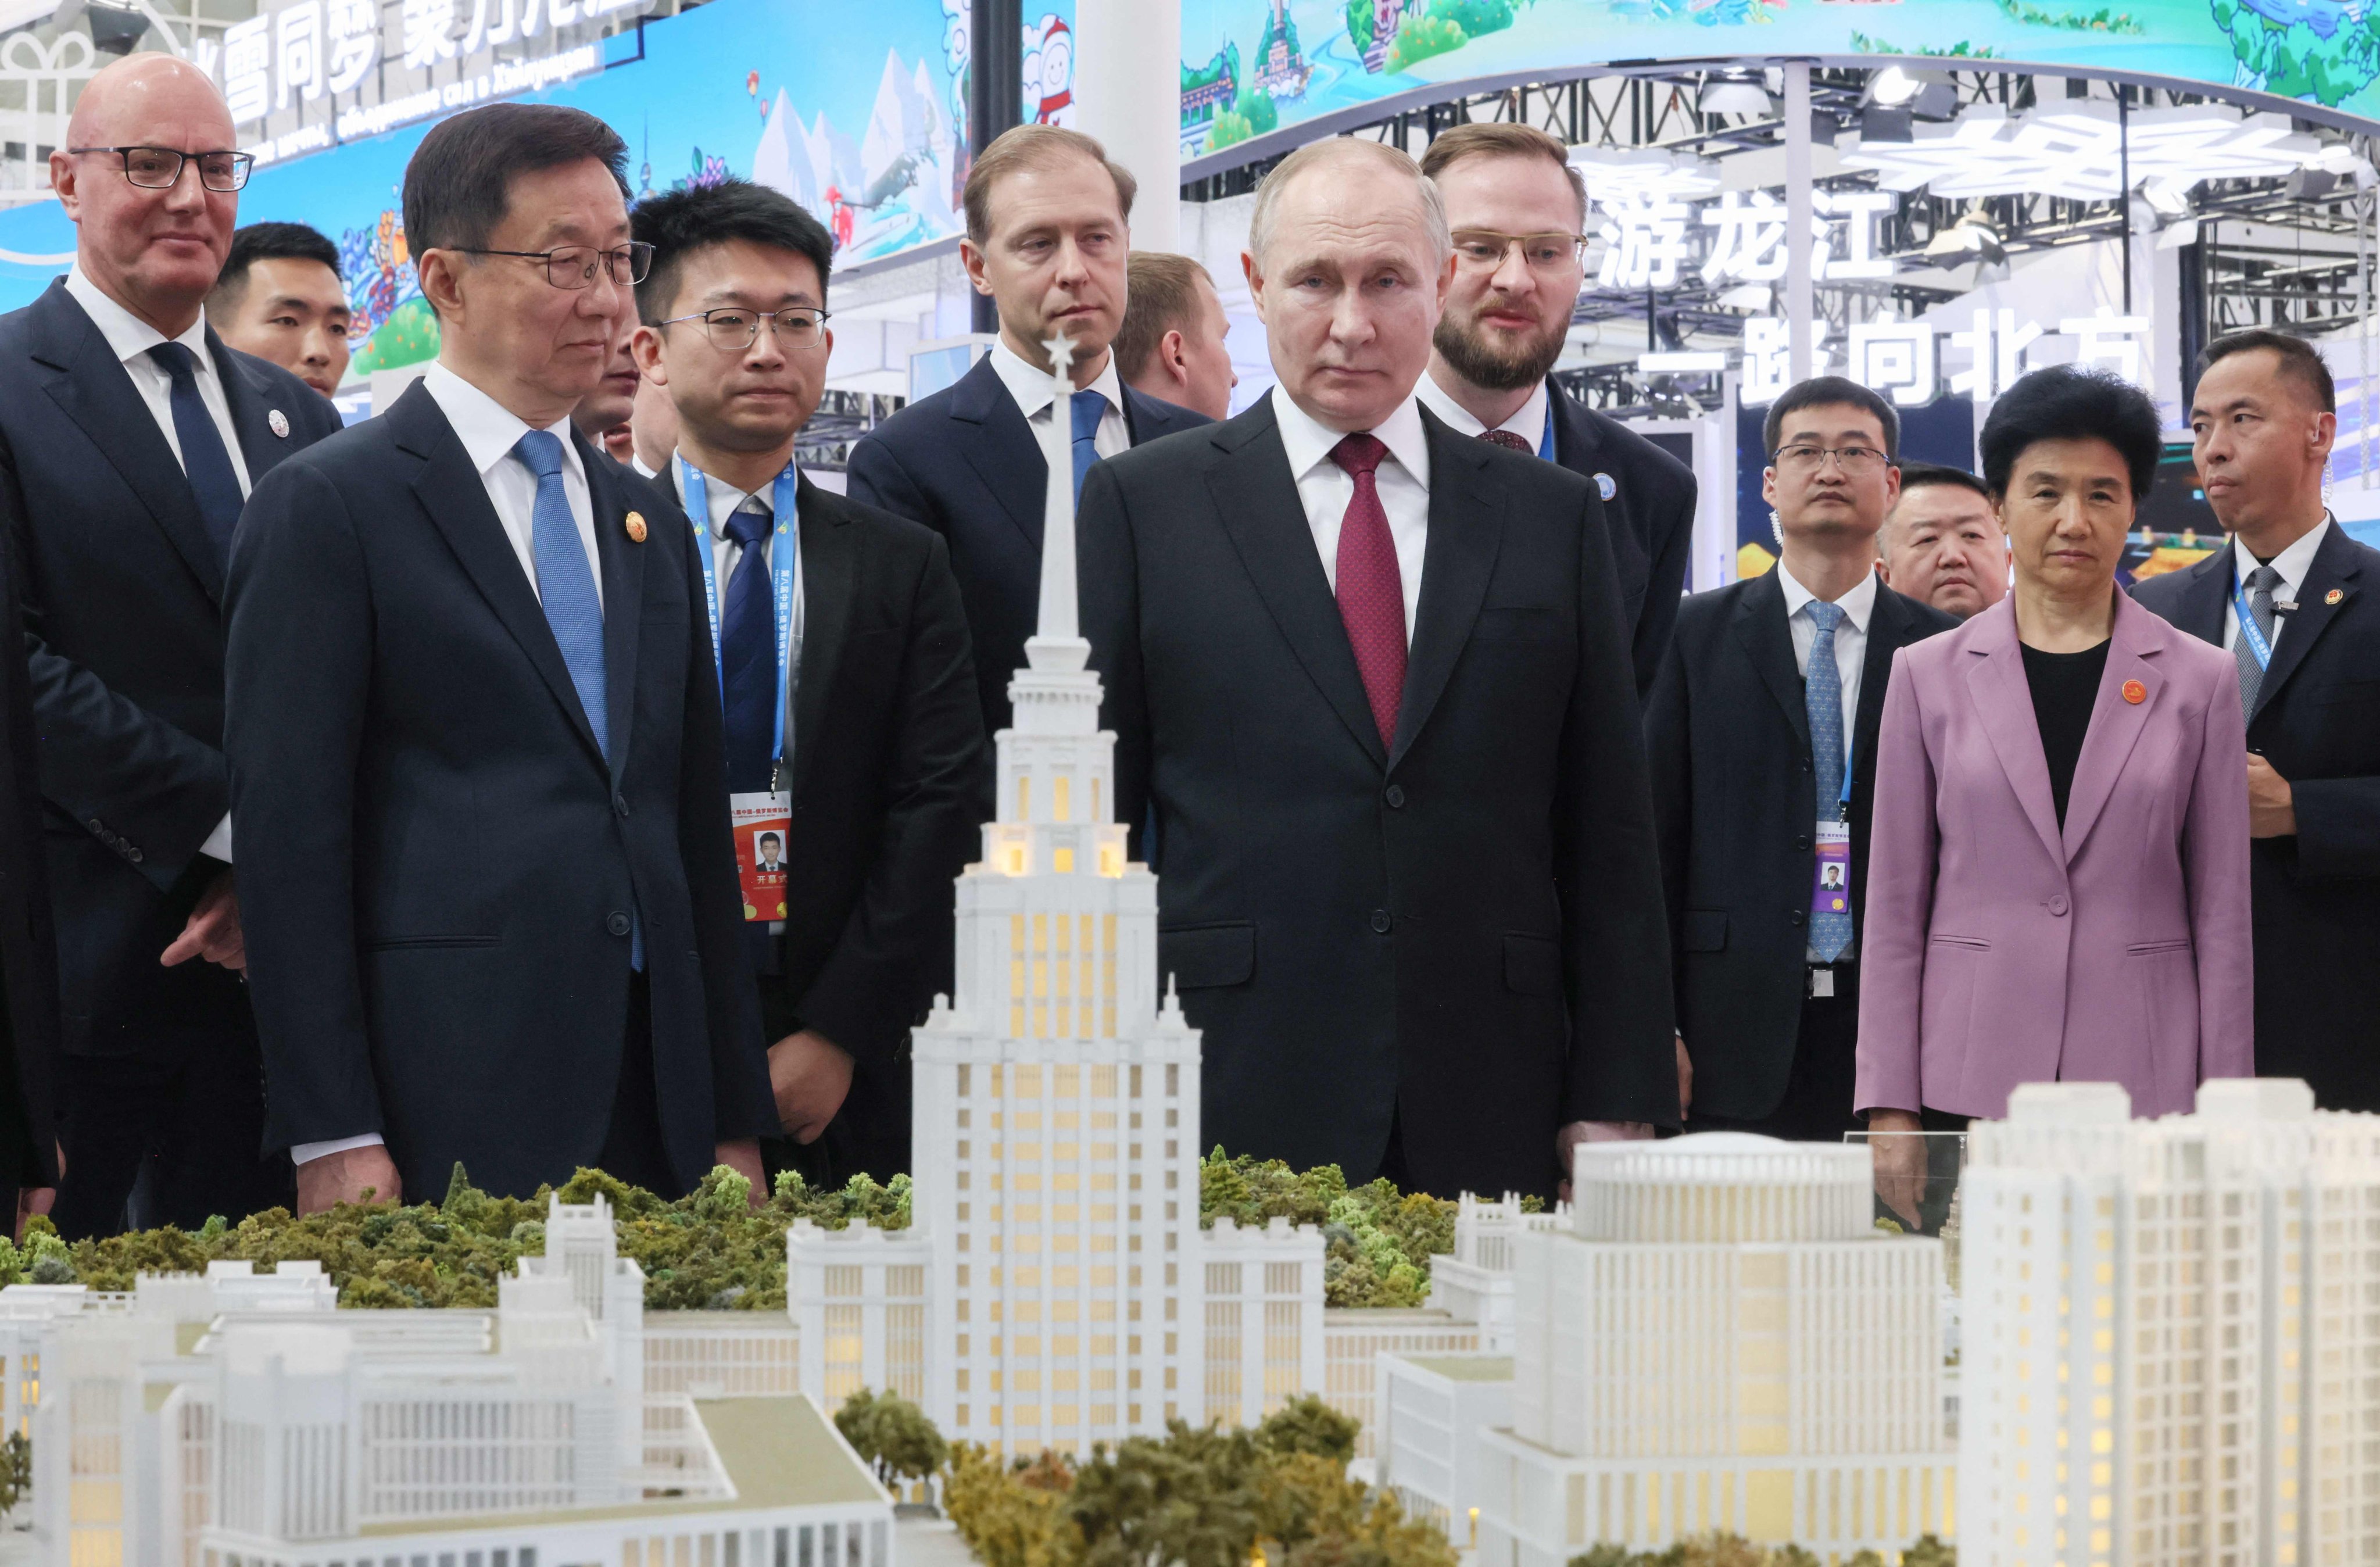 Russian President Vladimir Putin attends the Russia-China Expo in Harbin, northeast China, on Friday. Photo: Sputnik via AFP